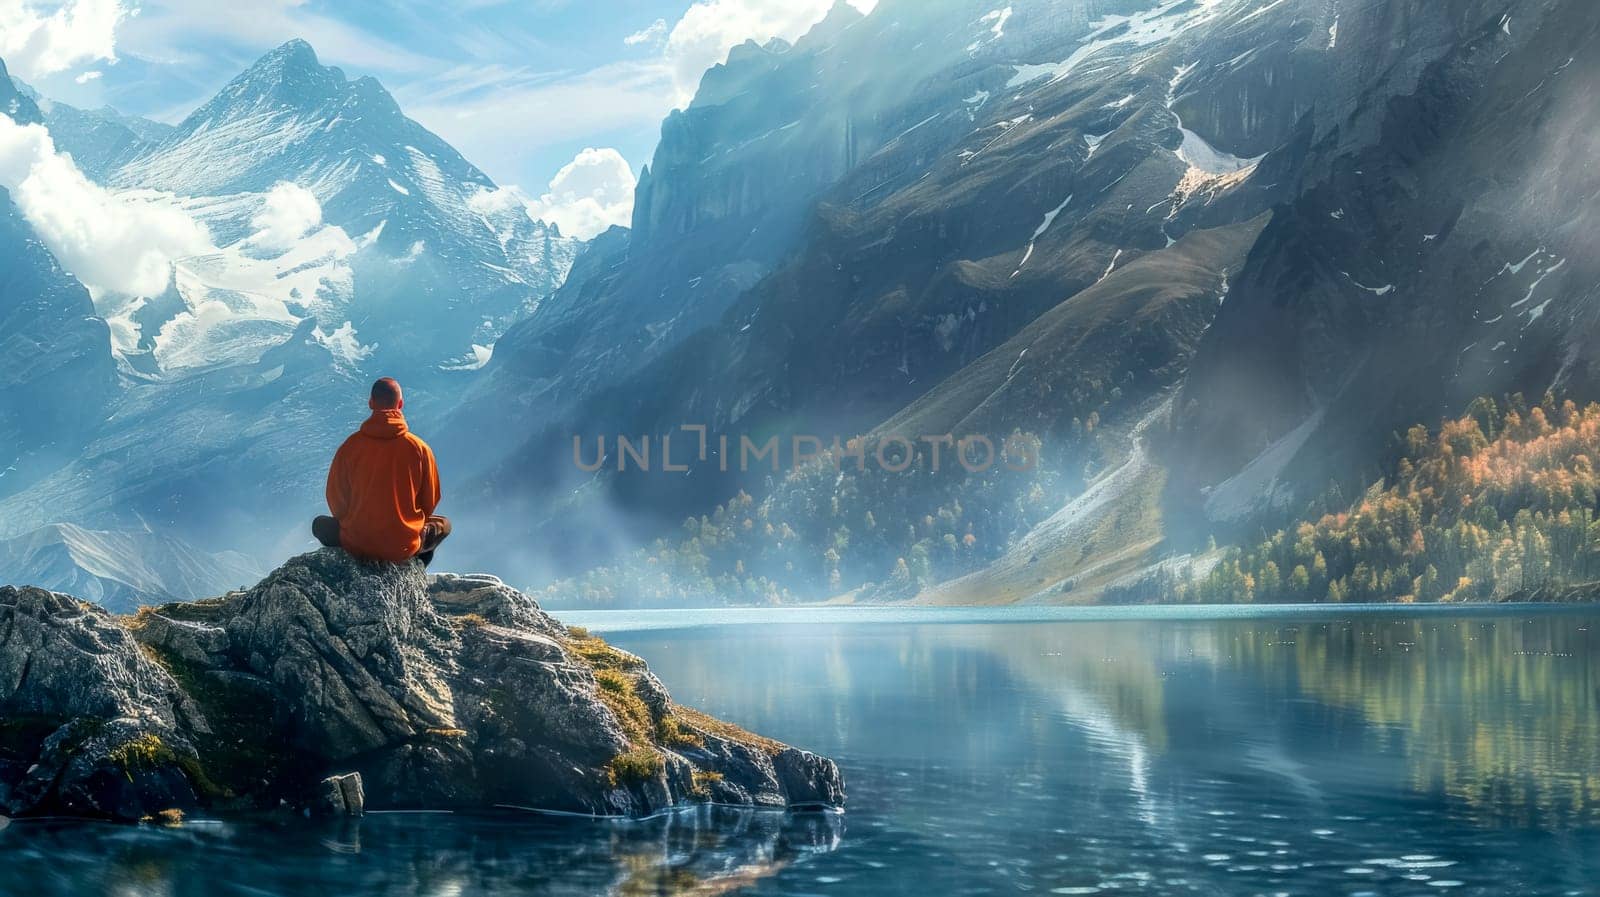 Person in orange meditating on a rock by a tranquil mountain lake by Edophoto